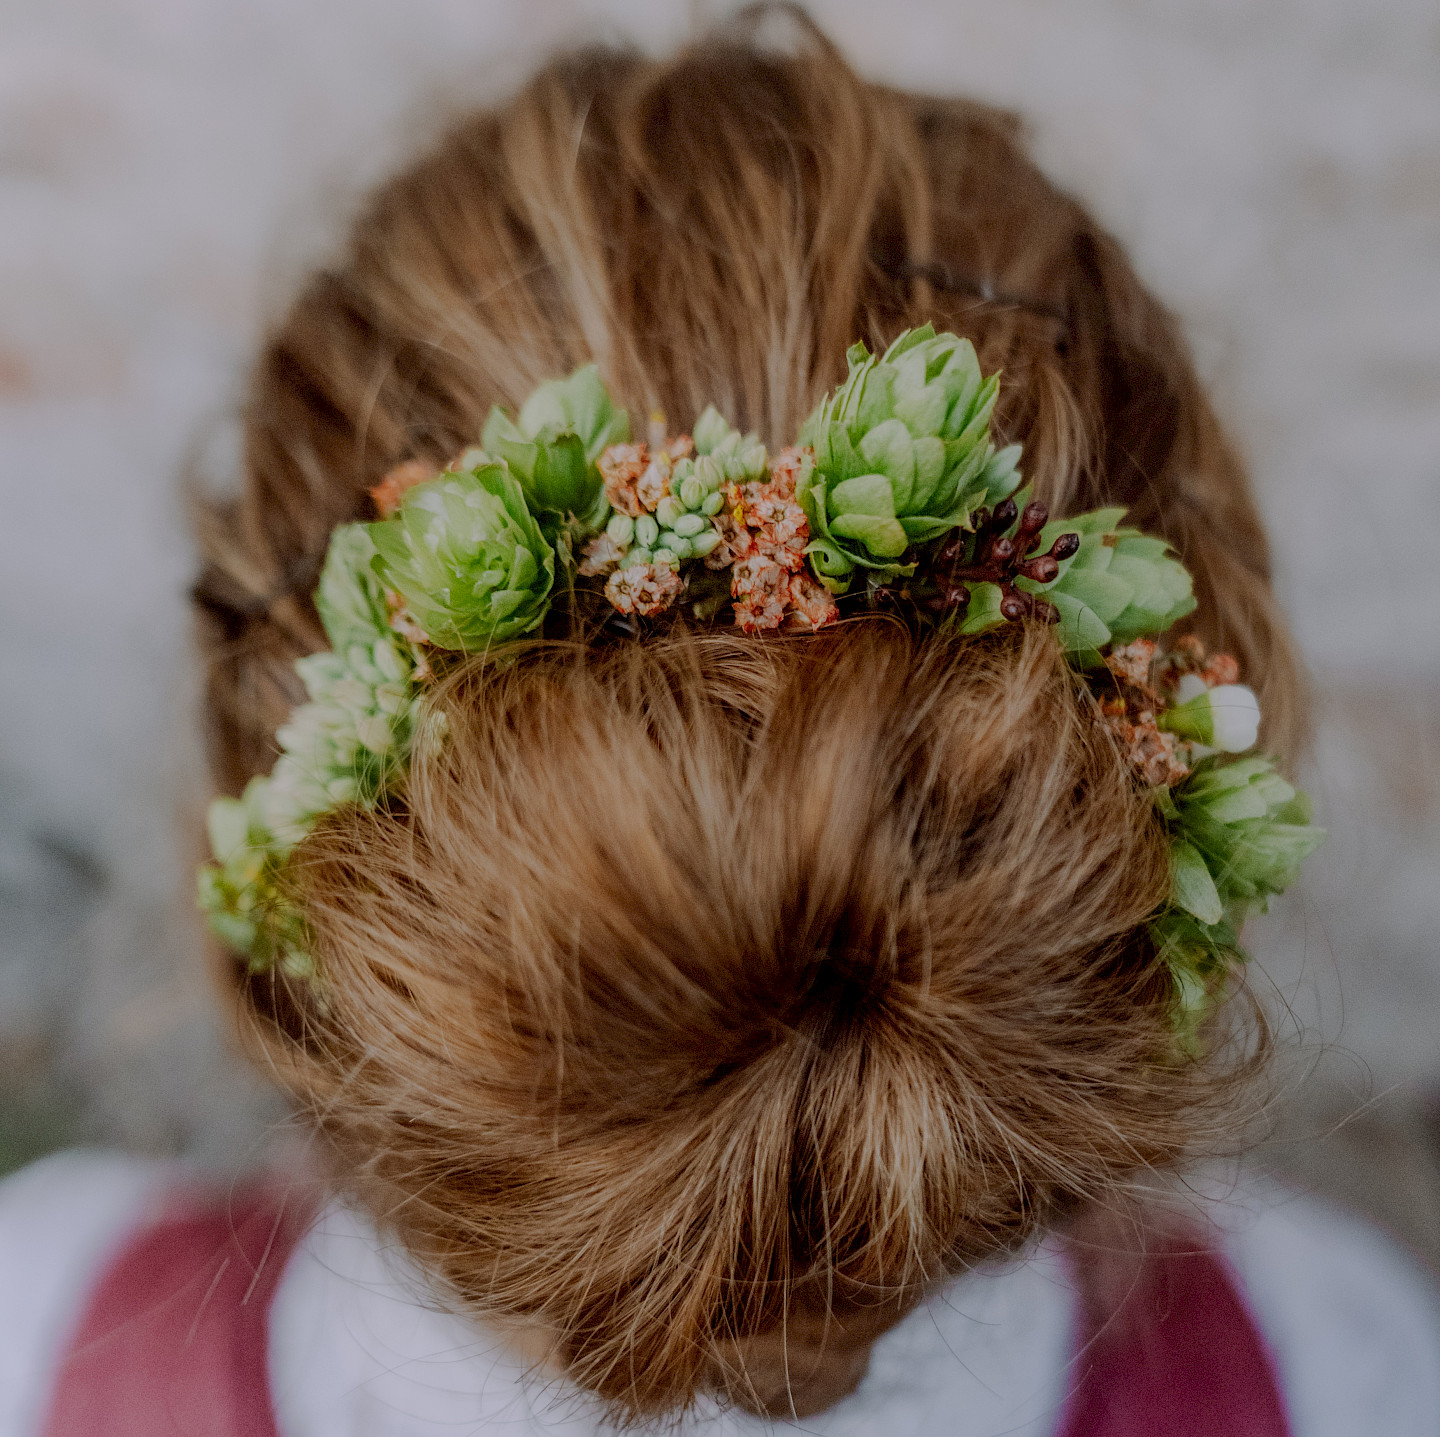 Perfect with the dirndl: a hair wreath made of hops and other flowers